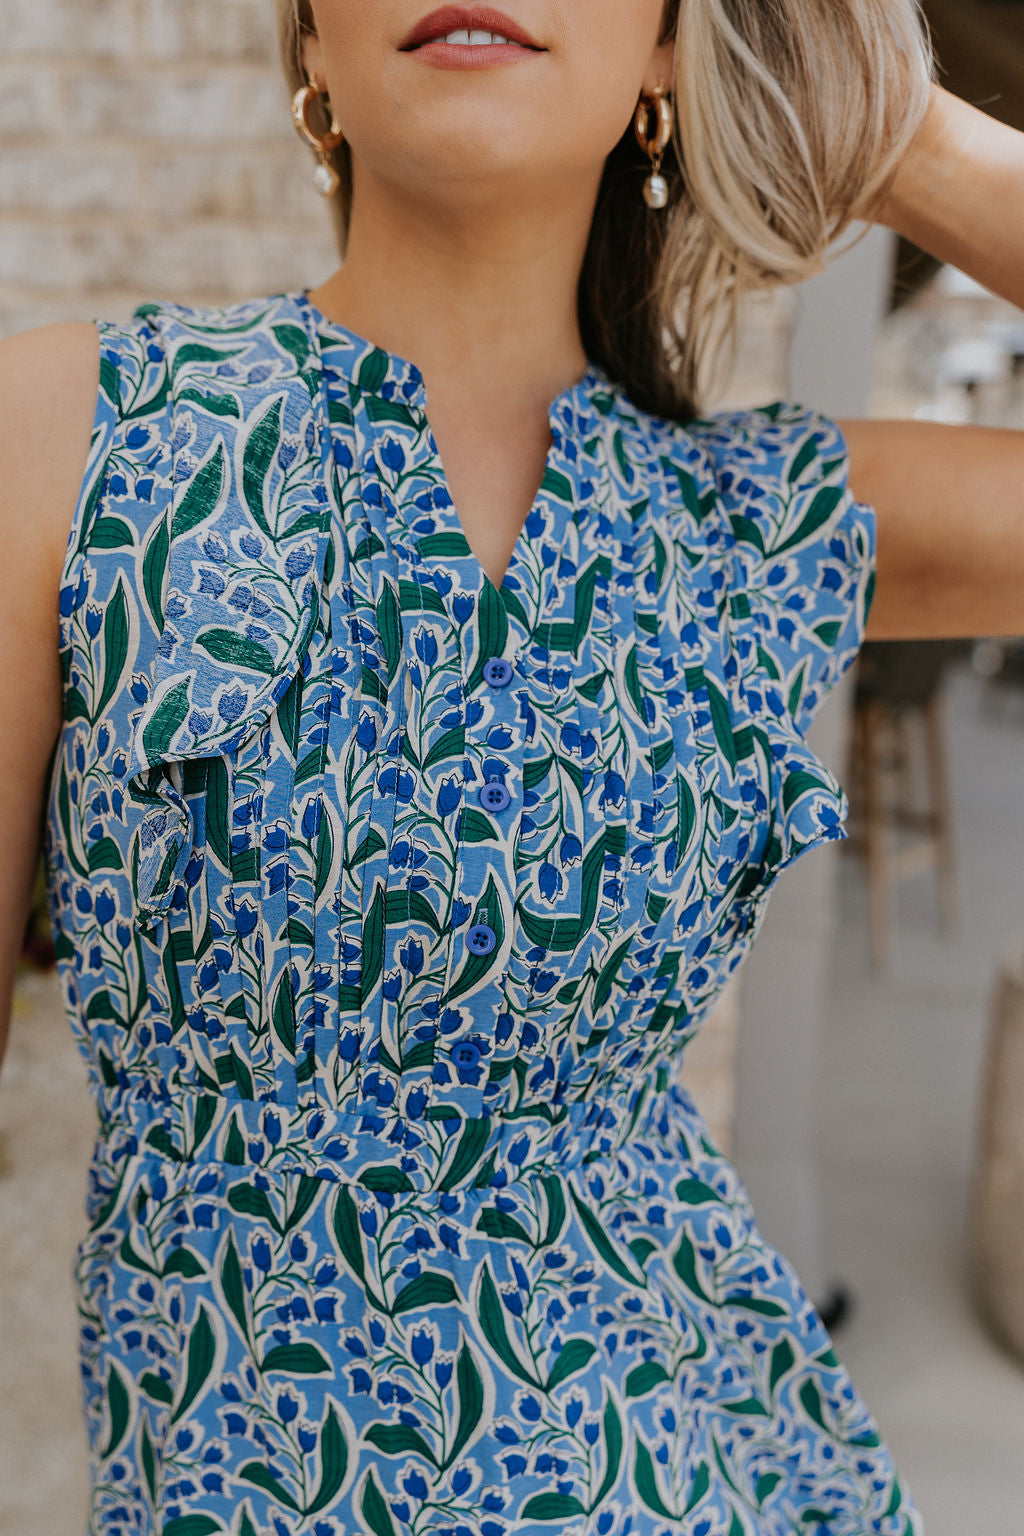  Close up view of female model wearing the June Blue & Green Floral Ruffle Mini Dress which features Blue and Green Floral Print, Ruffle Tiered Design, Mini Length, High Neck with V-Cutout and Sleeveless